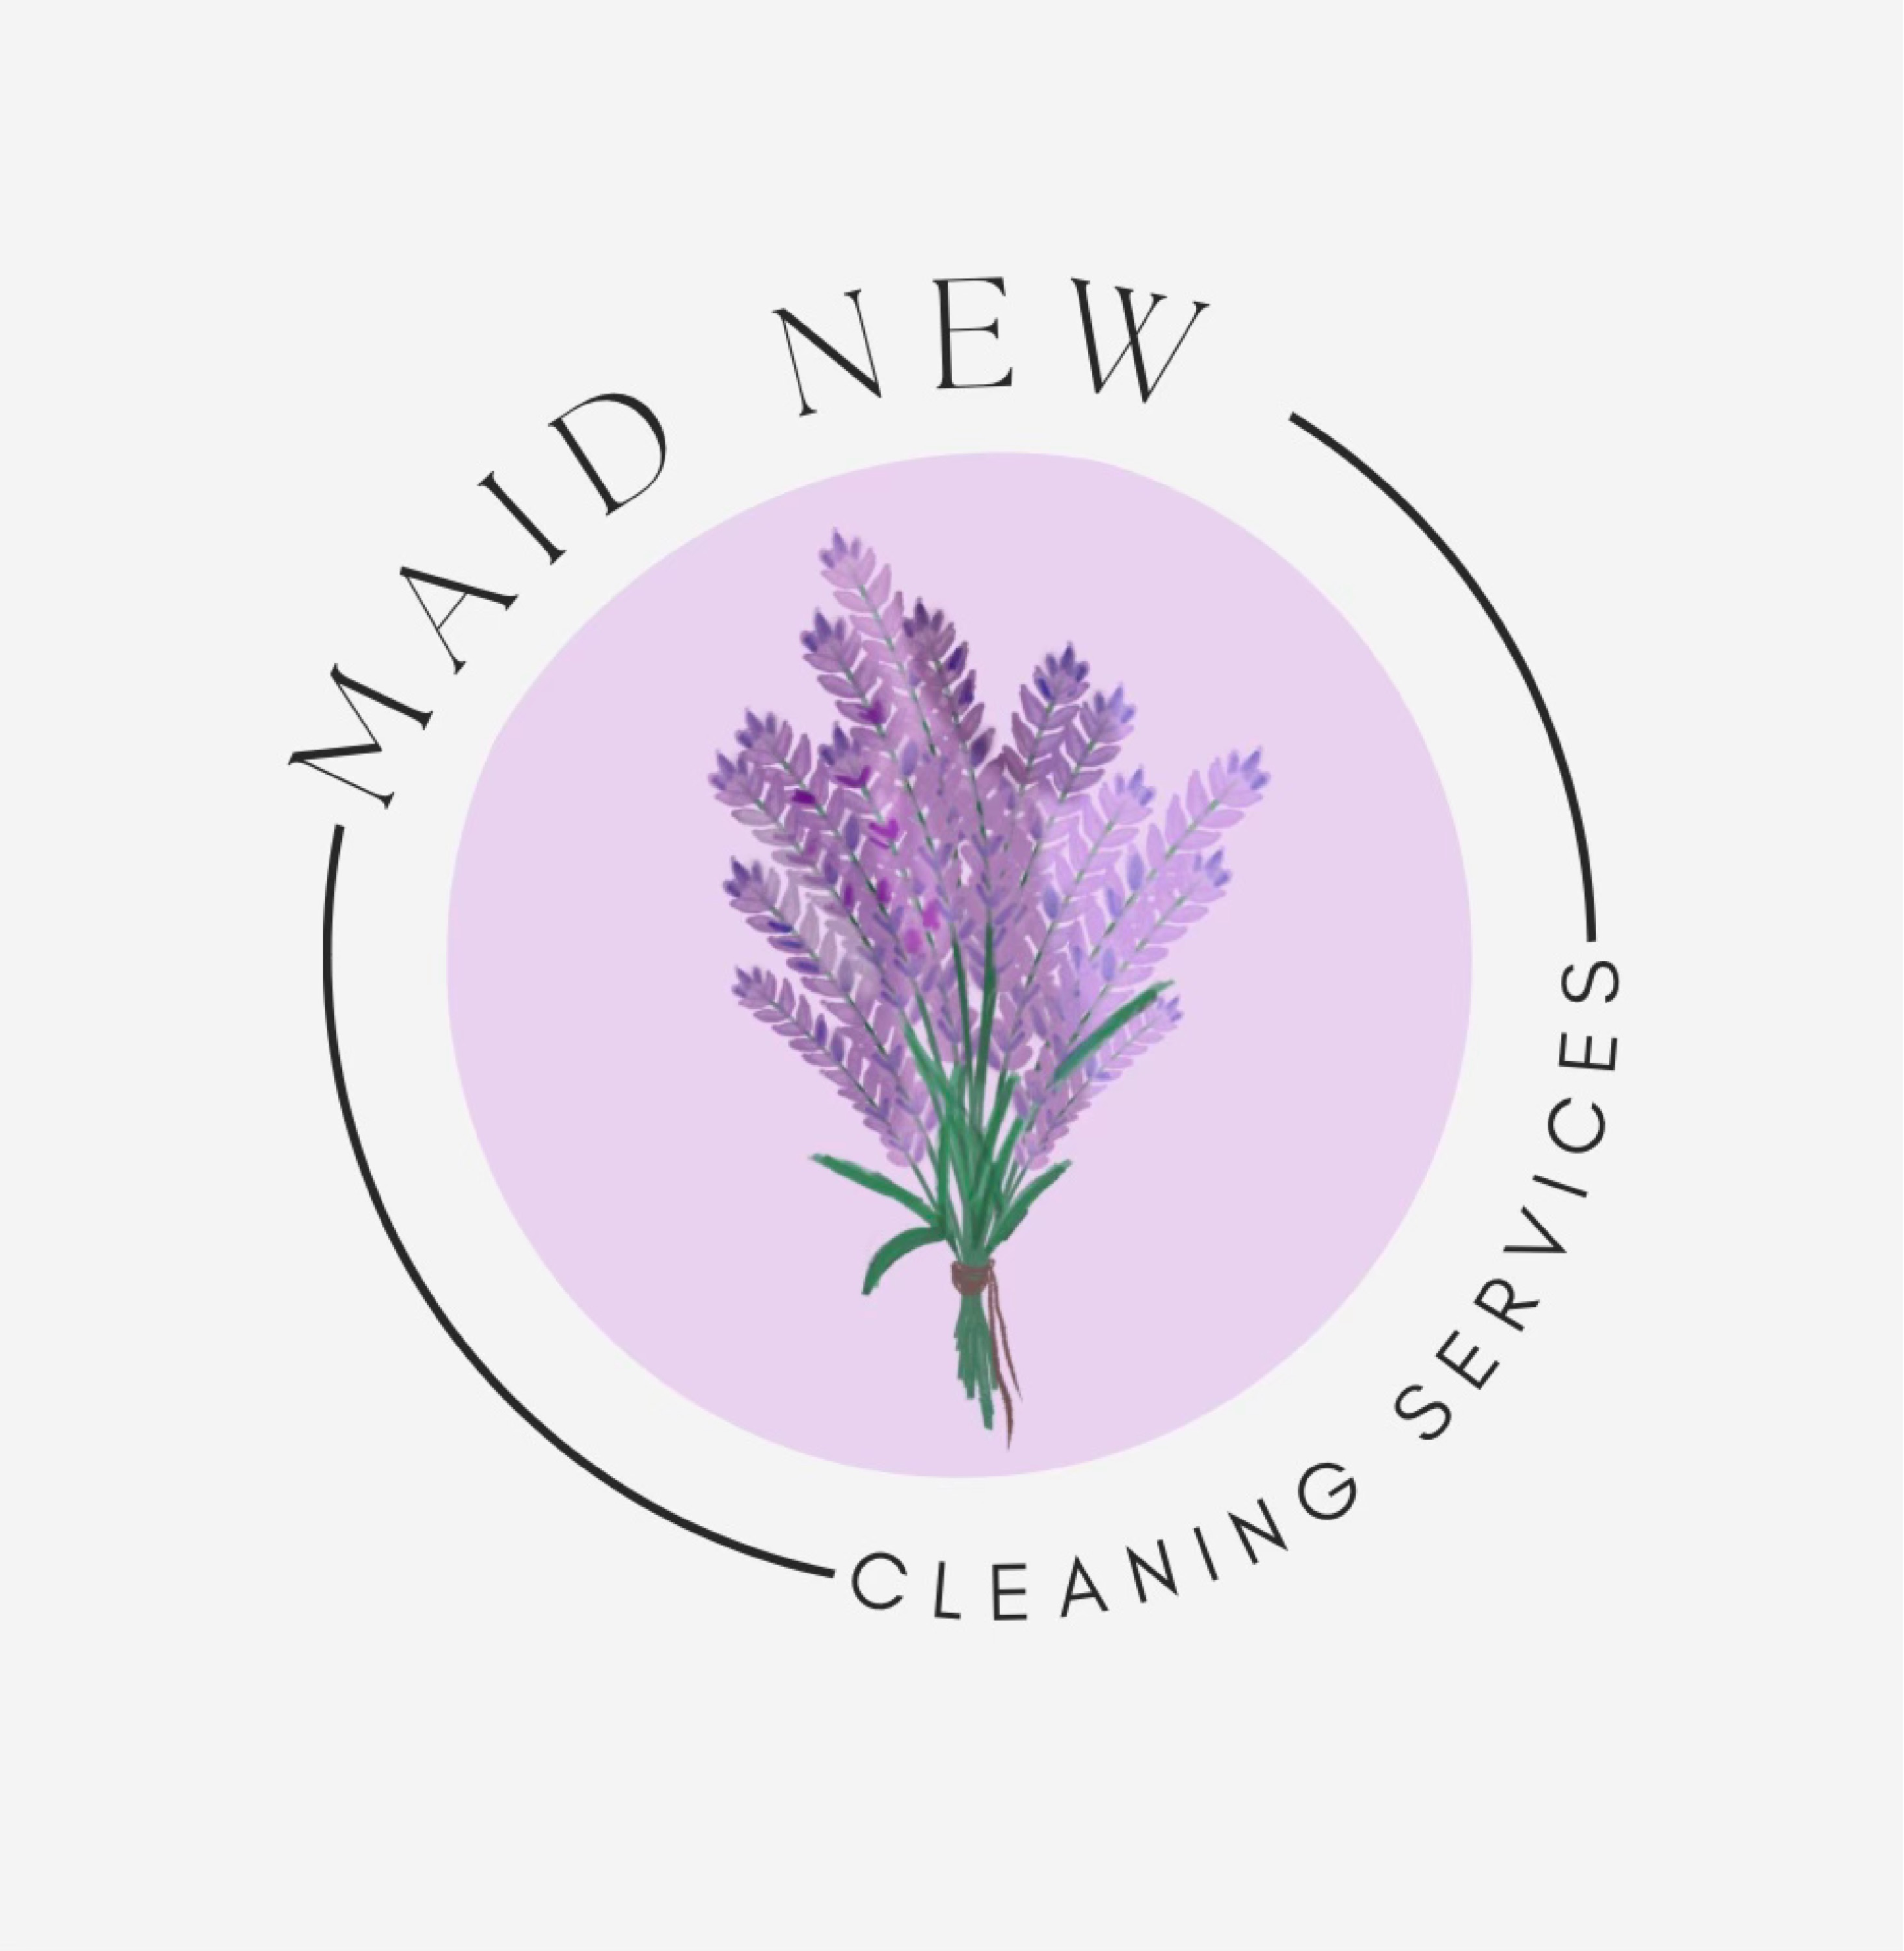 Maid New Cleaning Services Logo